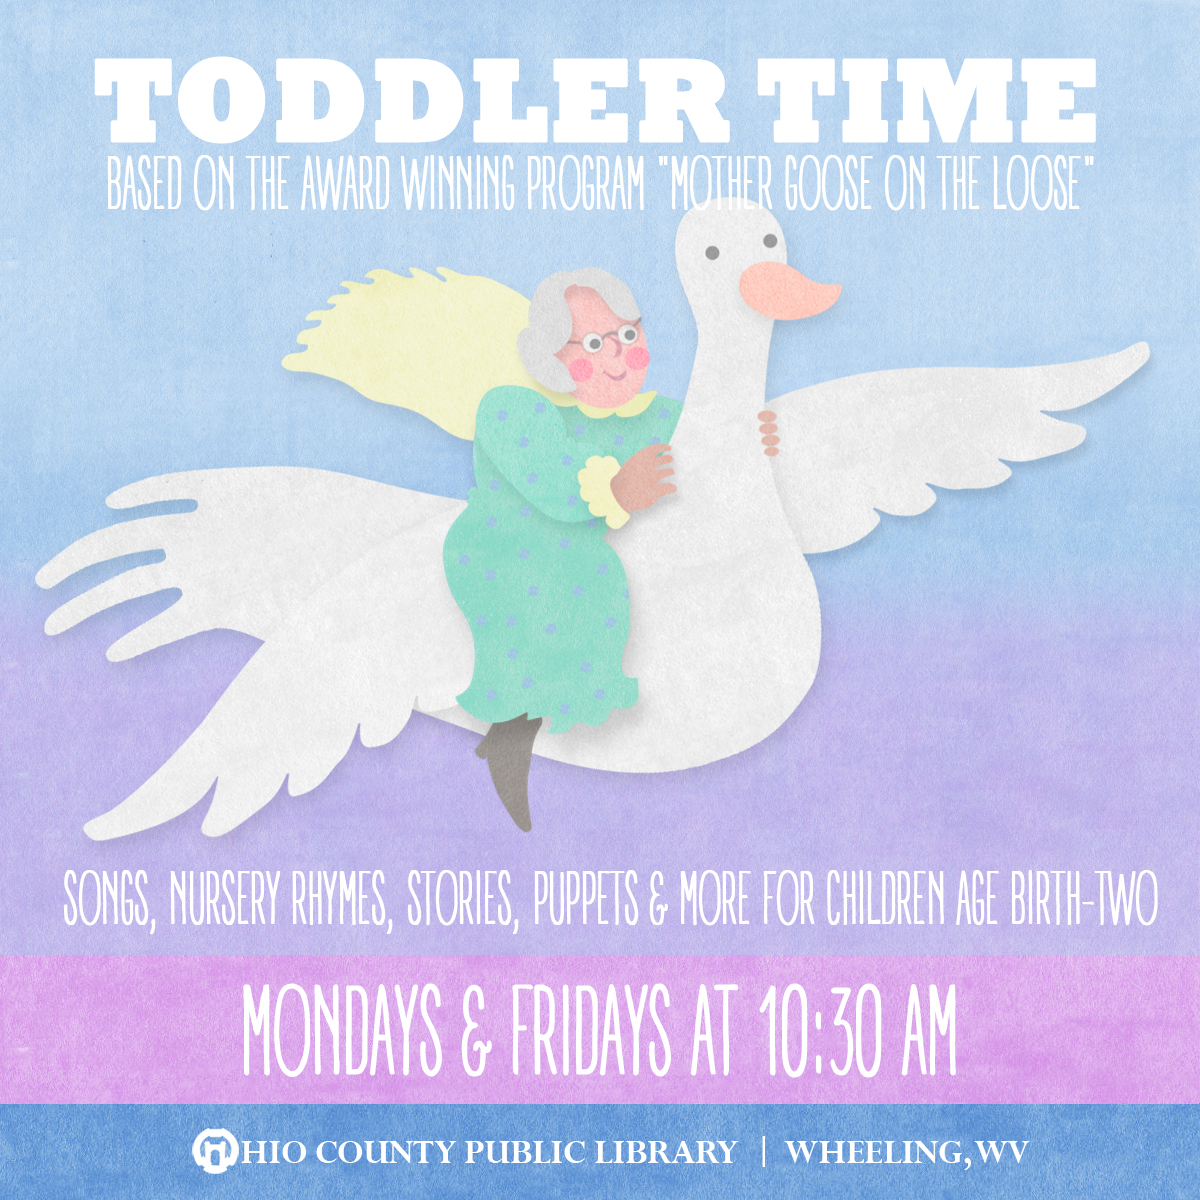 Toddler Time: Fridays at 10:30 am at the Ohio County Public Library